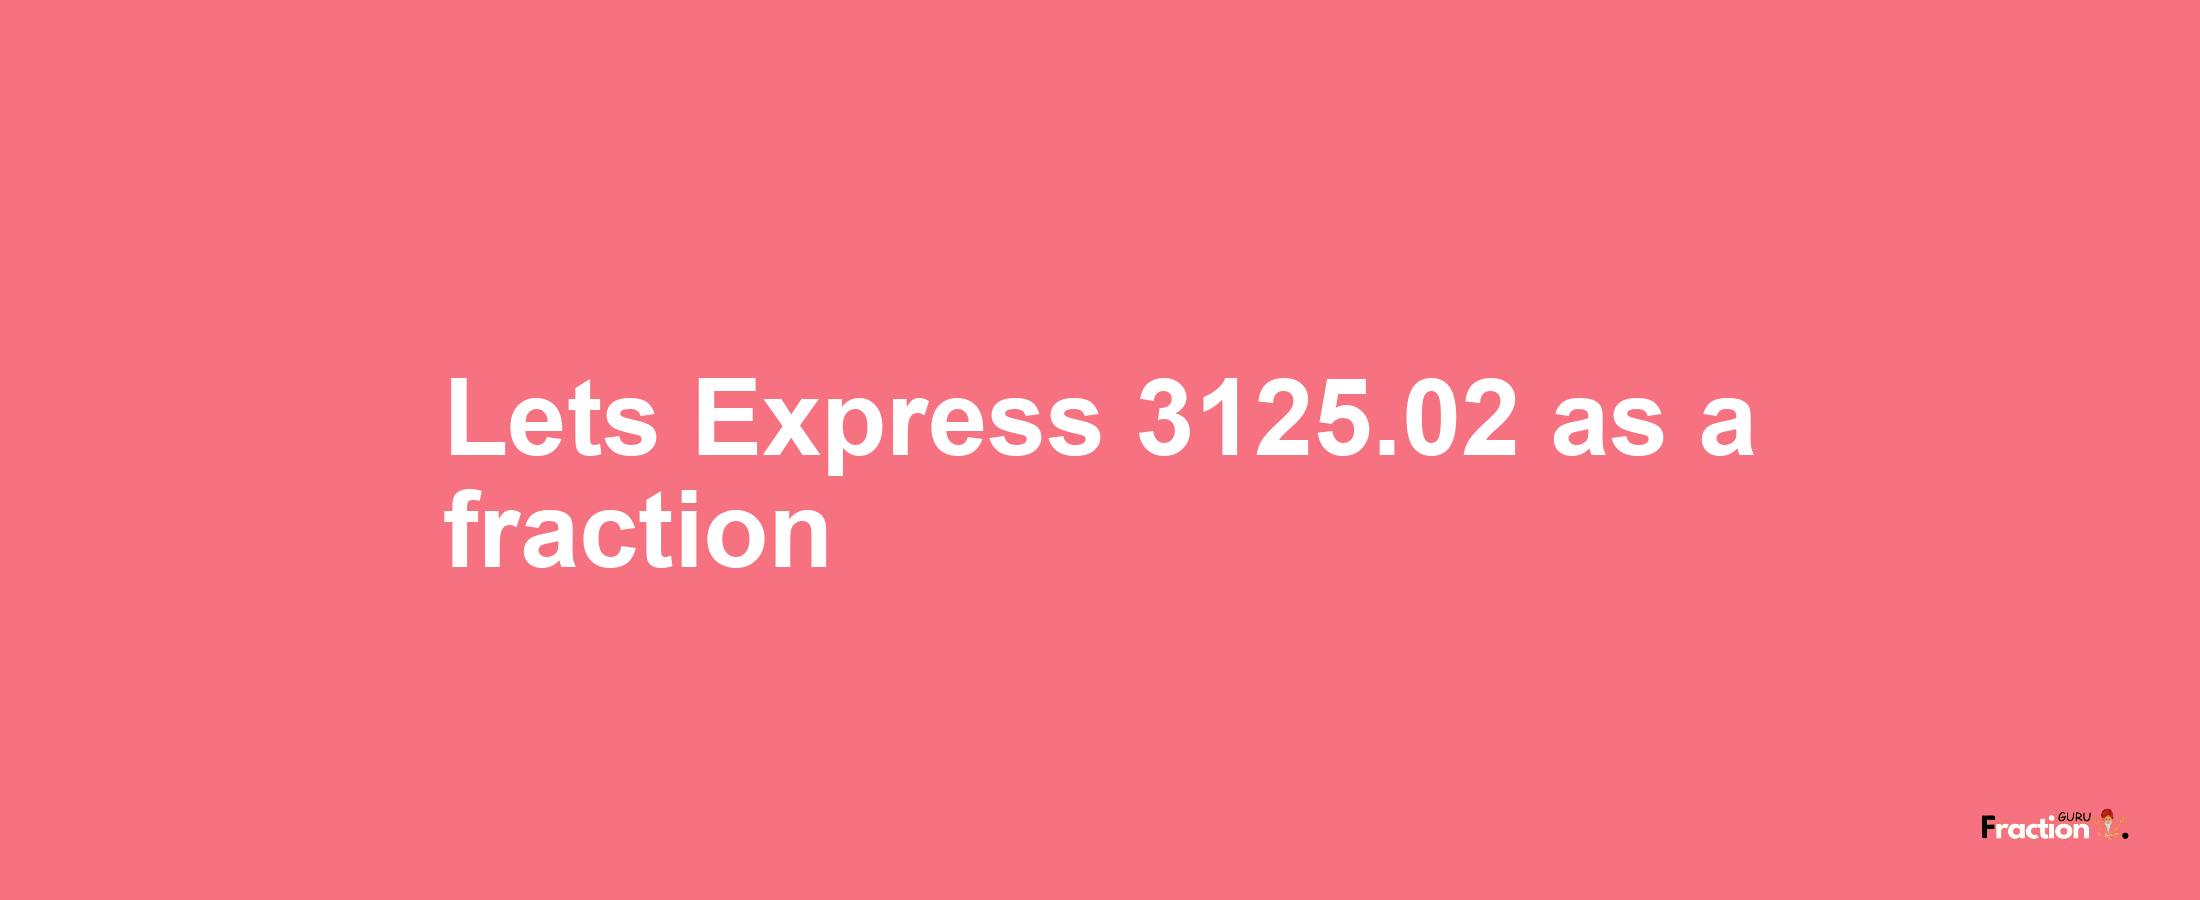 Lets Express 3125.02 as afraction